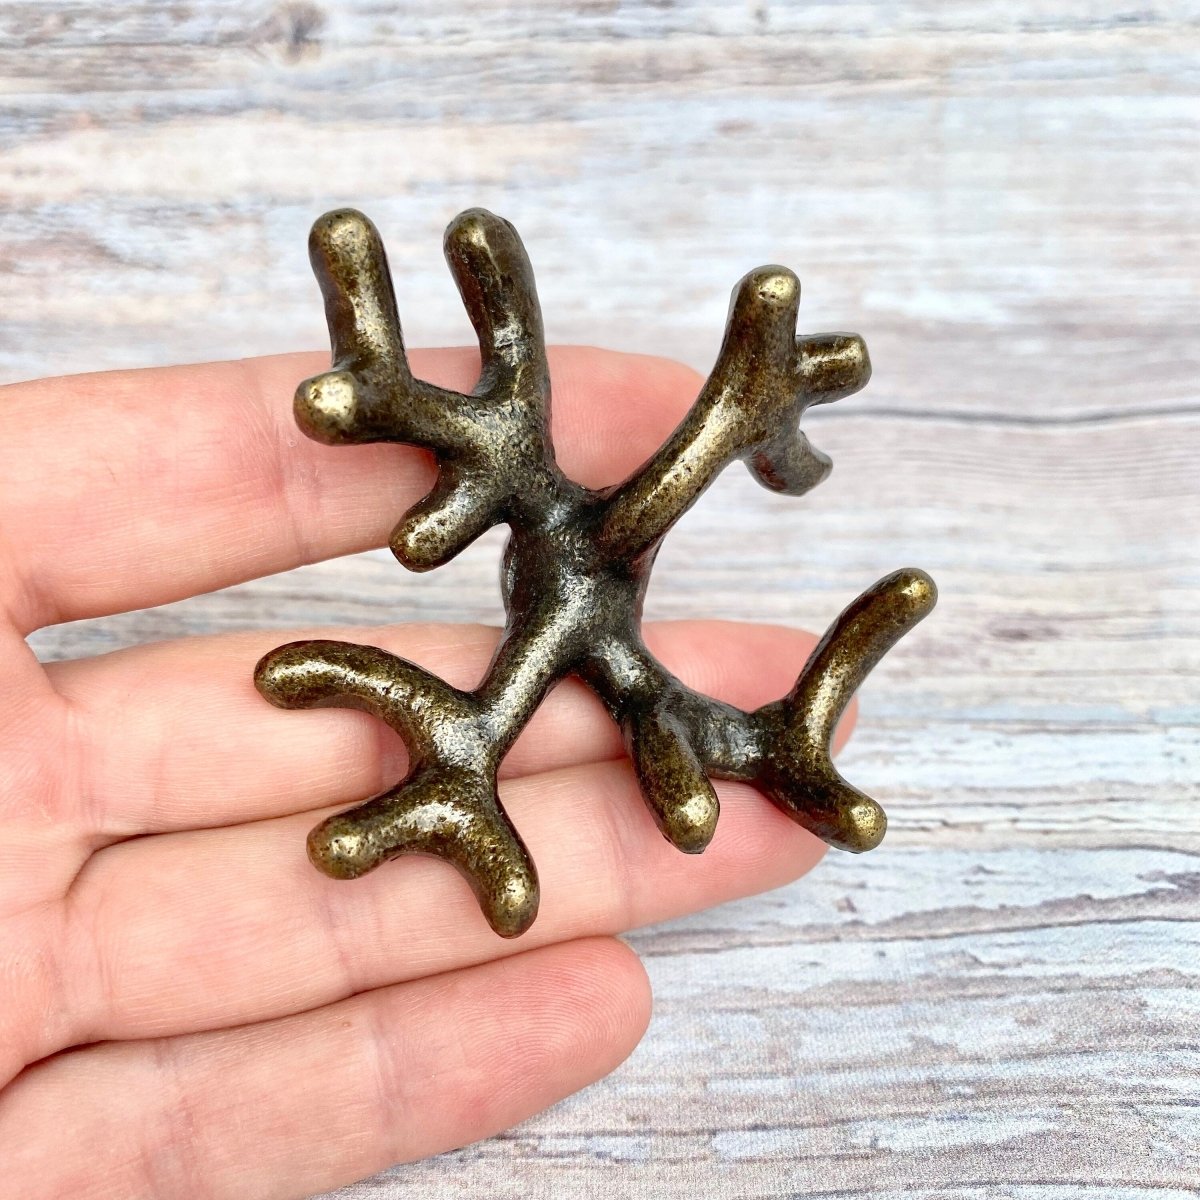 Coral Drawer Knobs in Antique Brass for Coastal Decor - DaRosa Creations